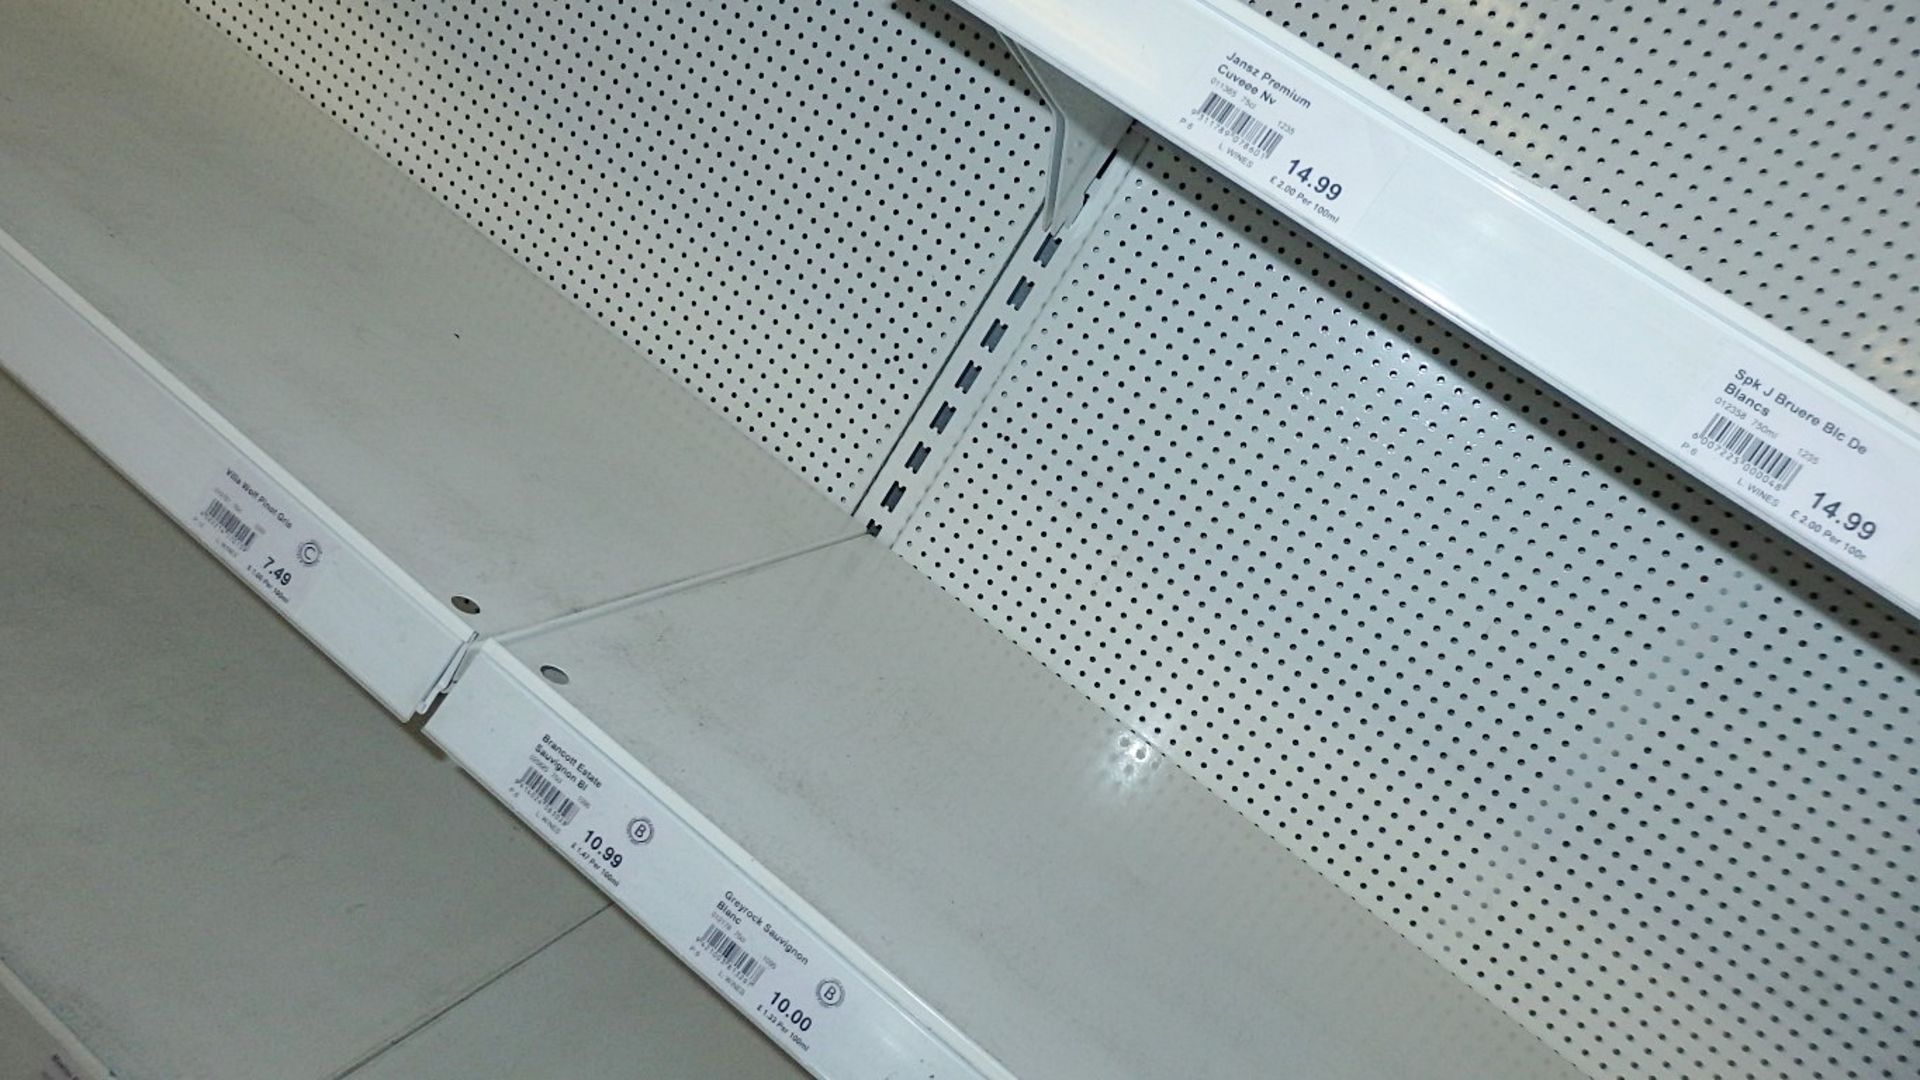 1 x Norpe Illuminated Display Chiller With Blind And Adjustable Shelving - Model: H522005 - Class - Image 3 of 9